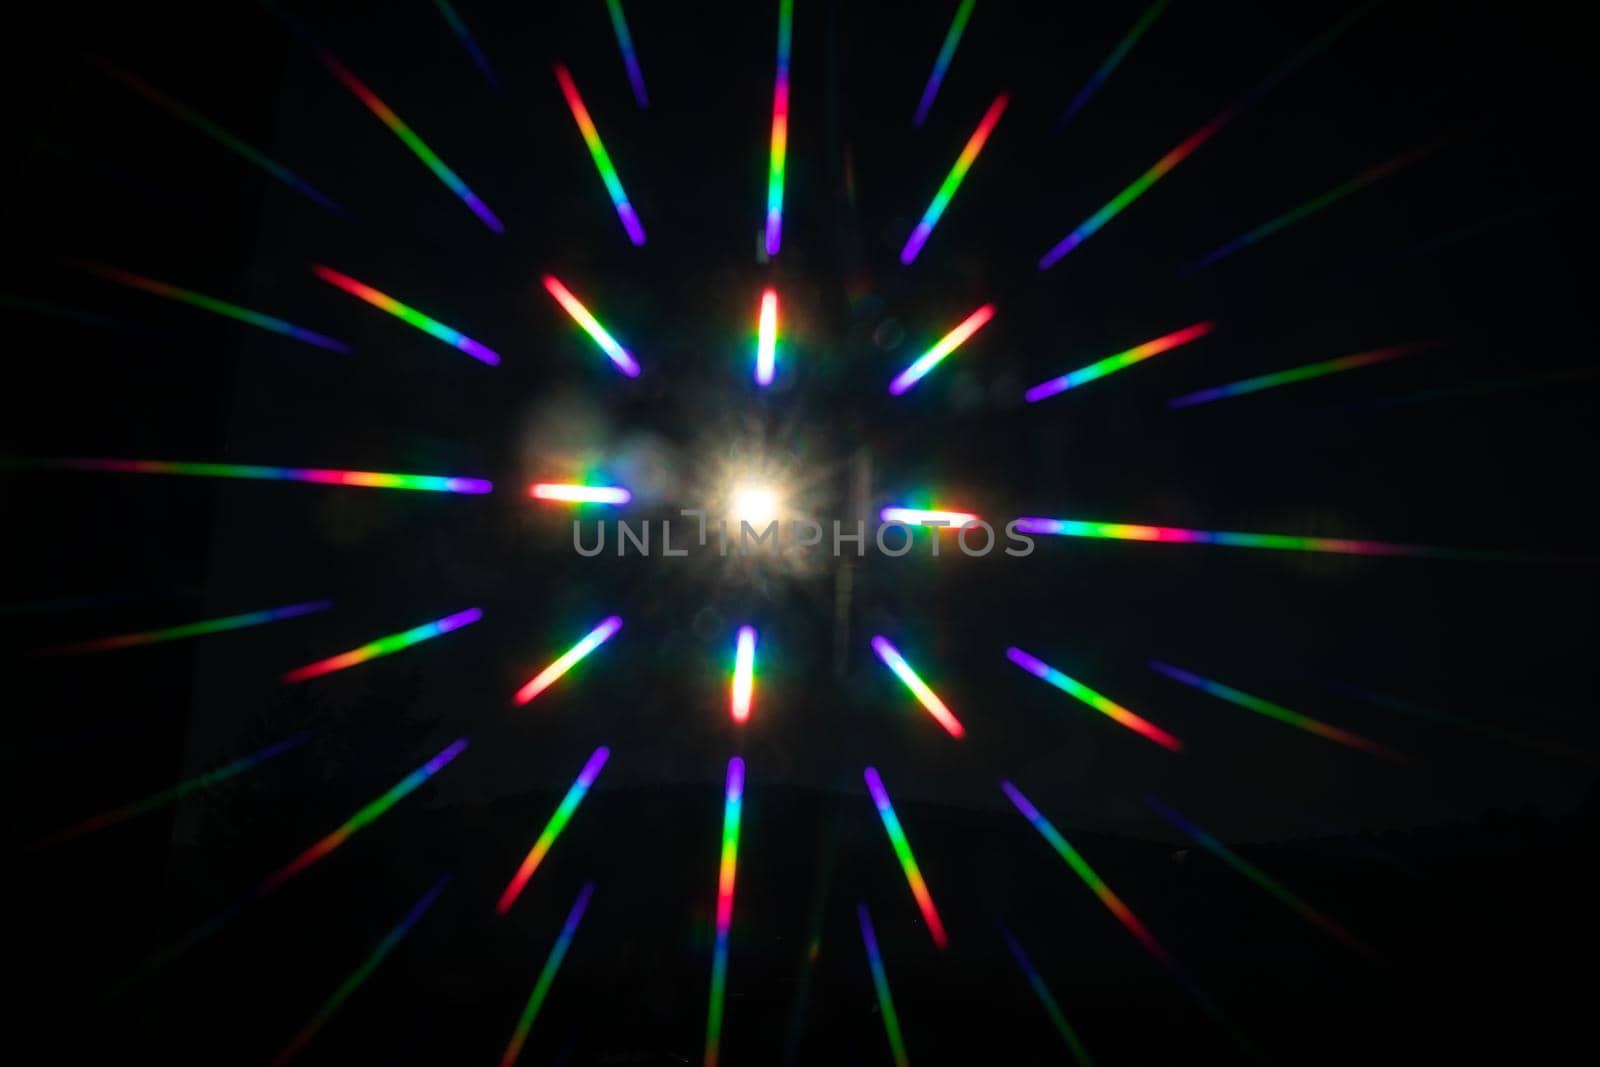 punctiform light source reflects the colors of the rainbow in all directions